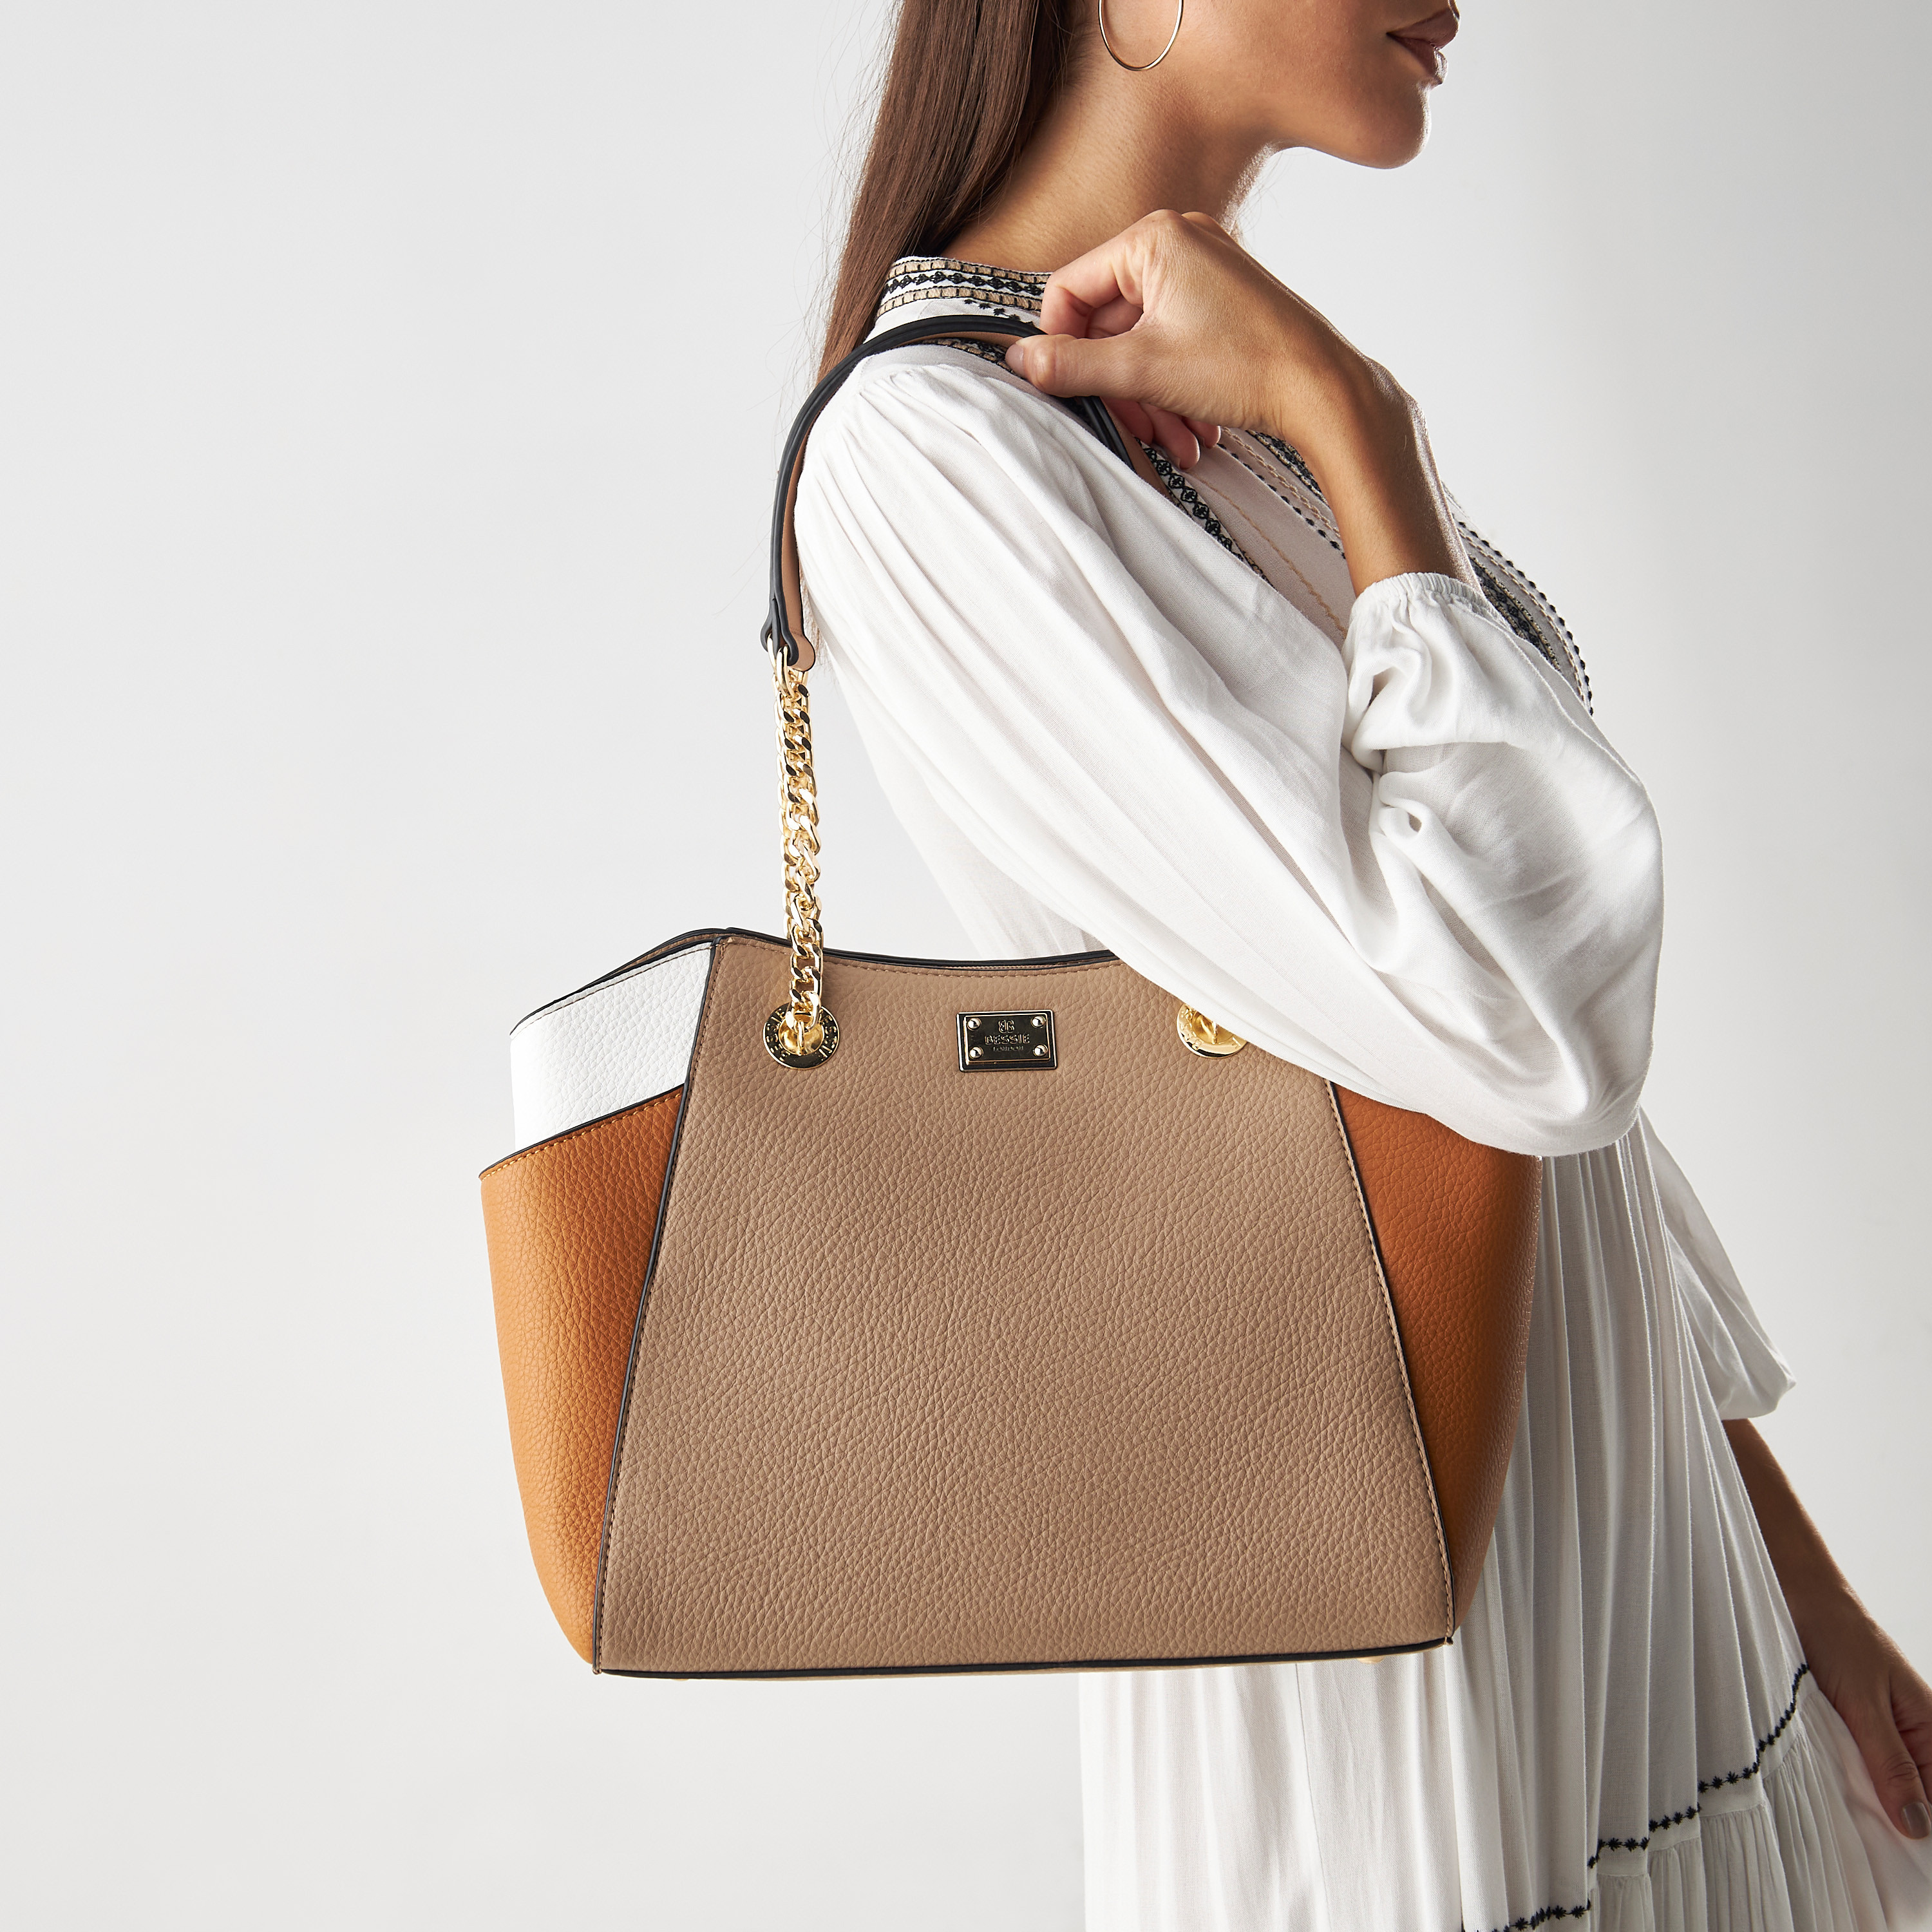 The perfect bag with Bessie London – Jessica Alice